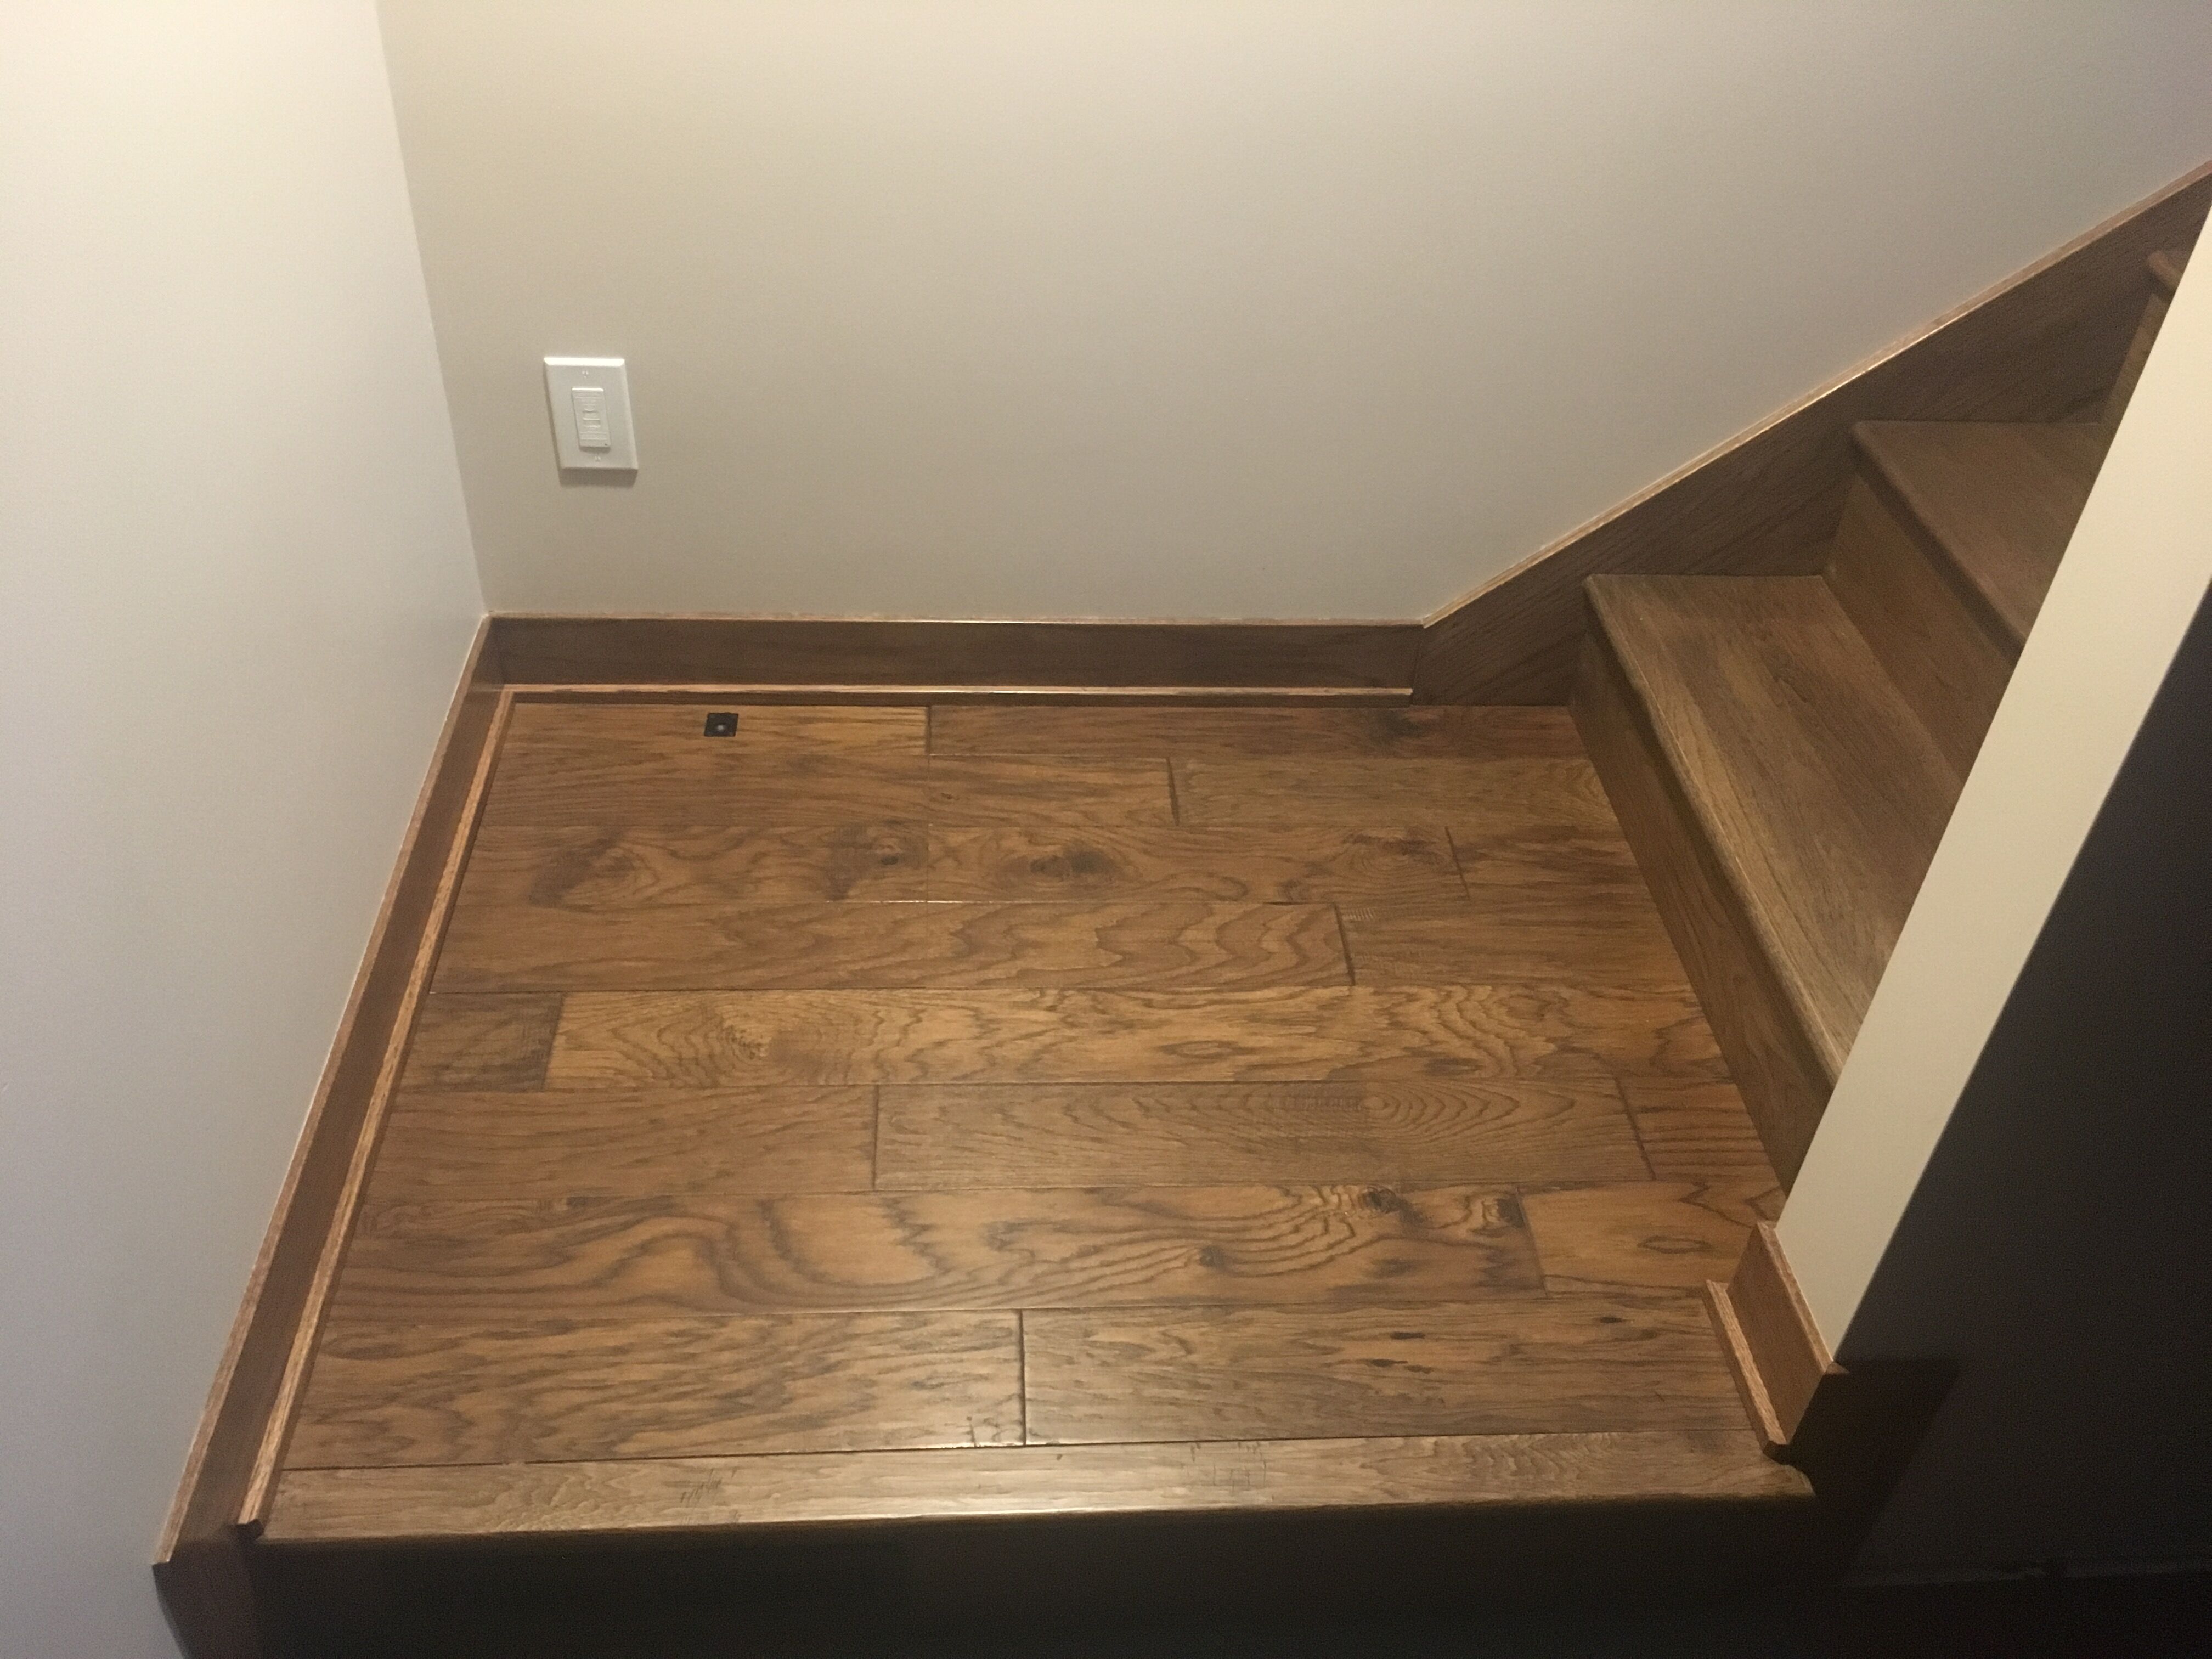  Whole Home Remodel with Stairway Trap Door